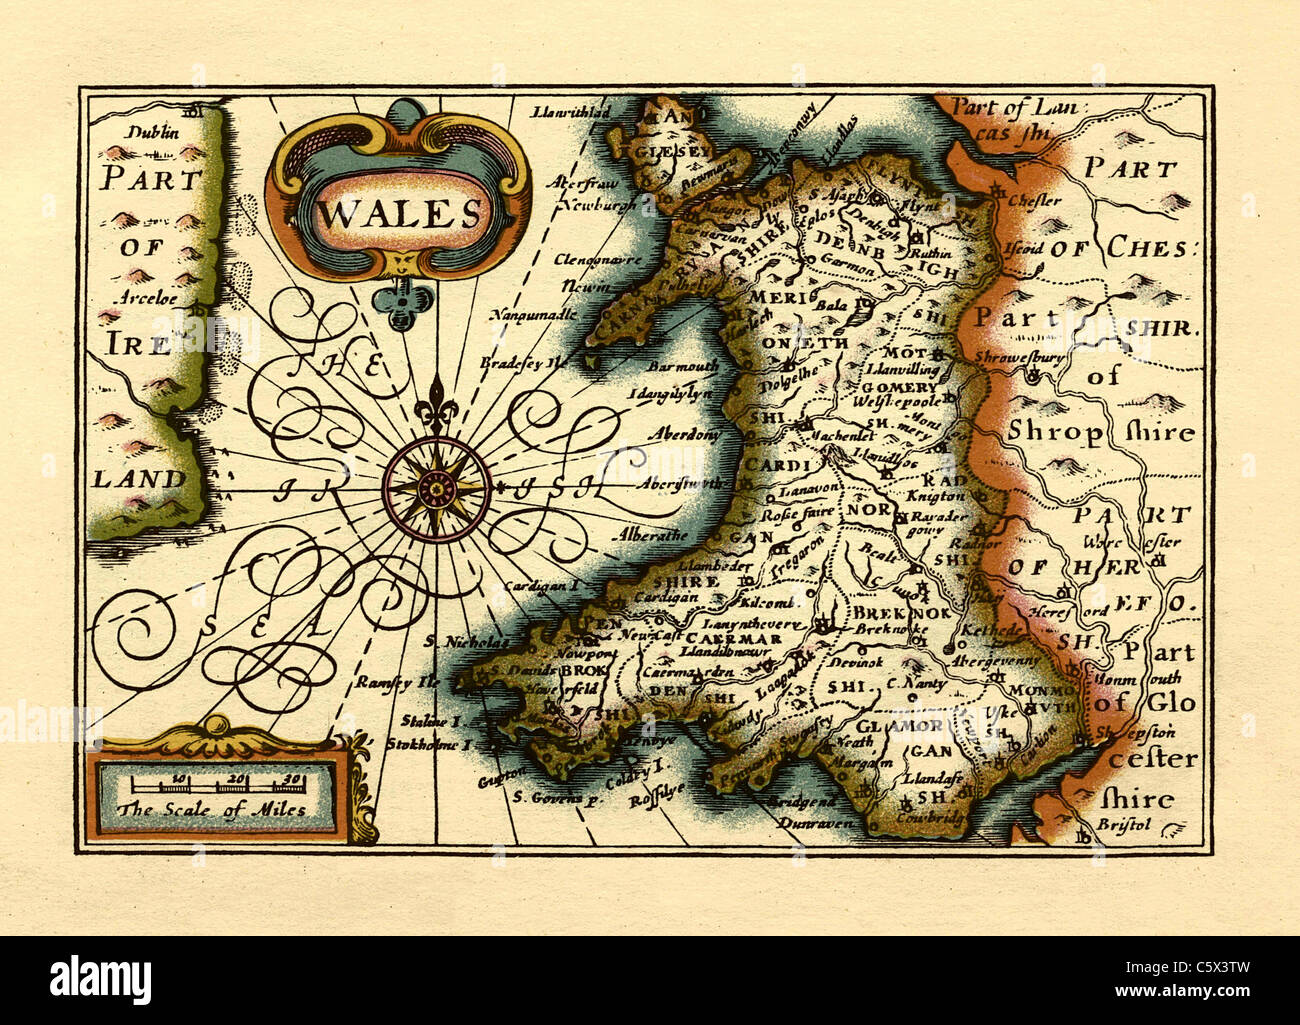 Wales - Old English County Map by John Speed, circa 1625 Stock Photo